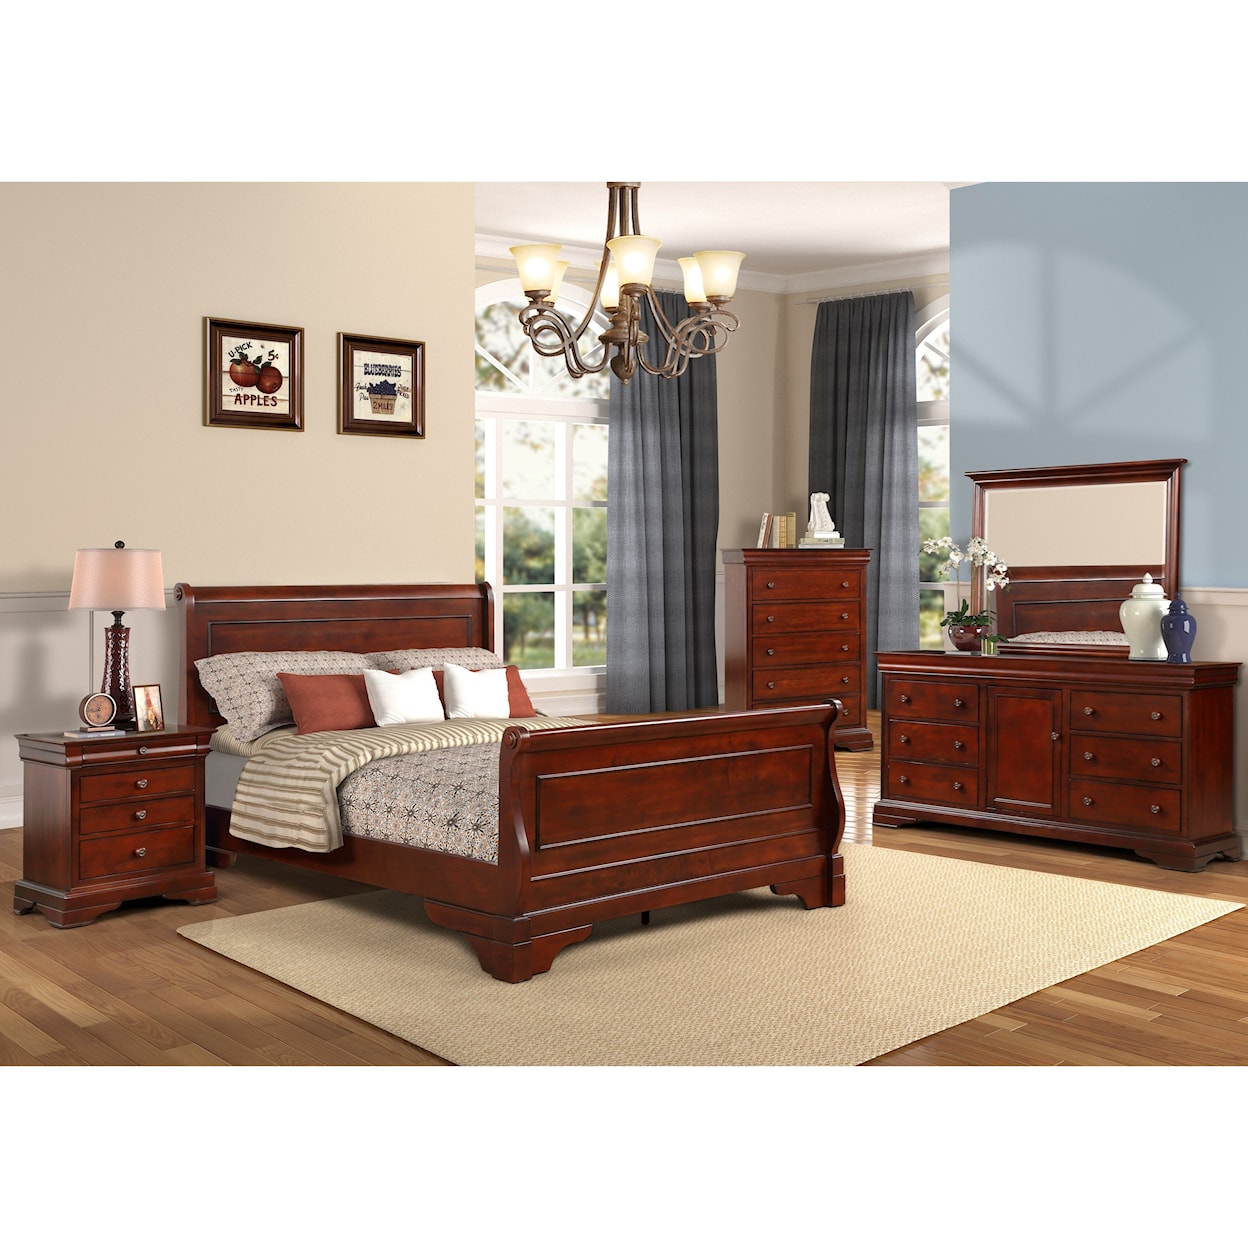 New Classic Furniture Versaille California King Bedroom Group